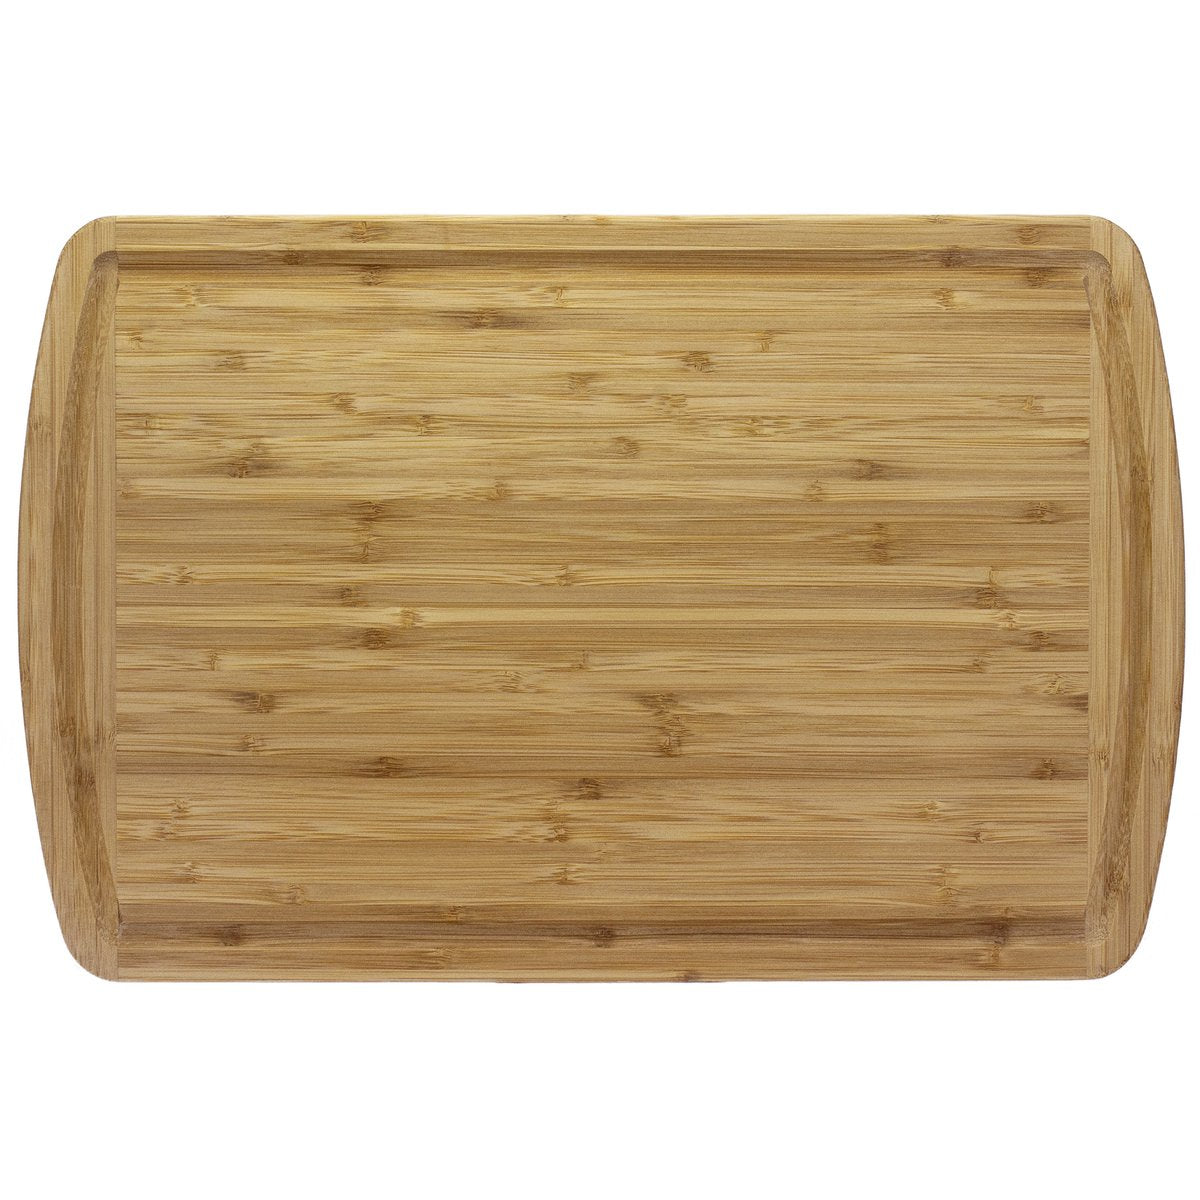 View Totally Bamboo - Malibu Groove Cutting & Carving Board